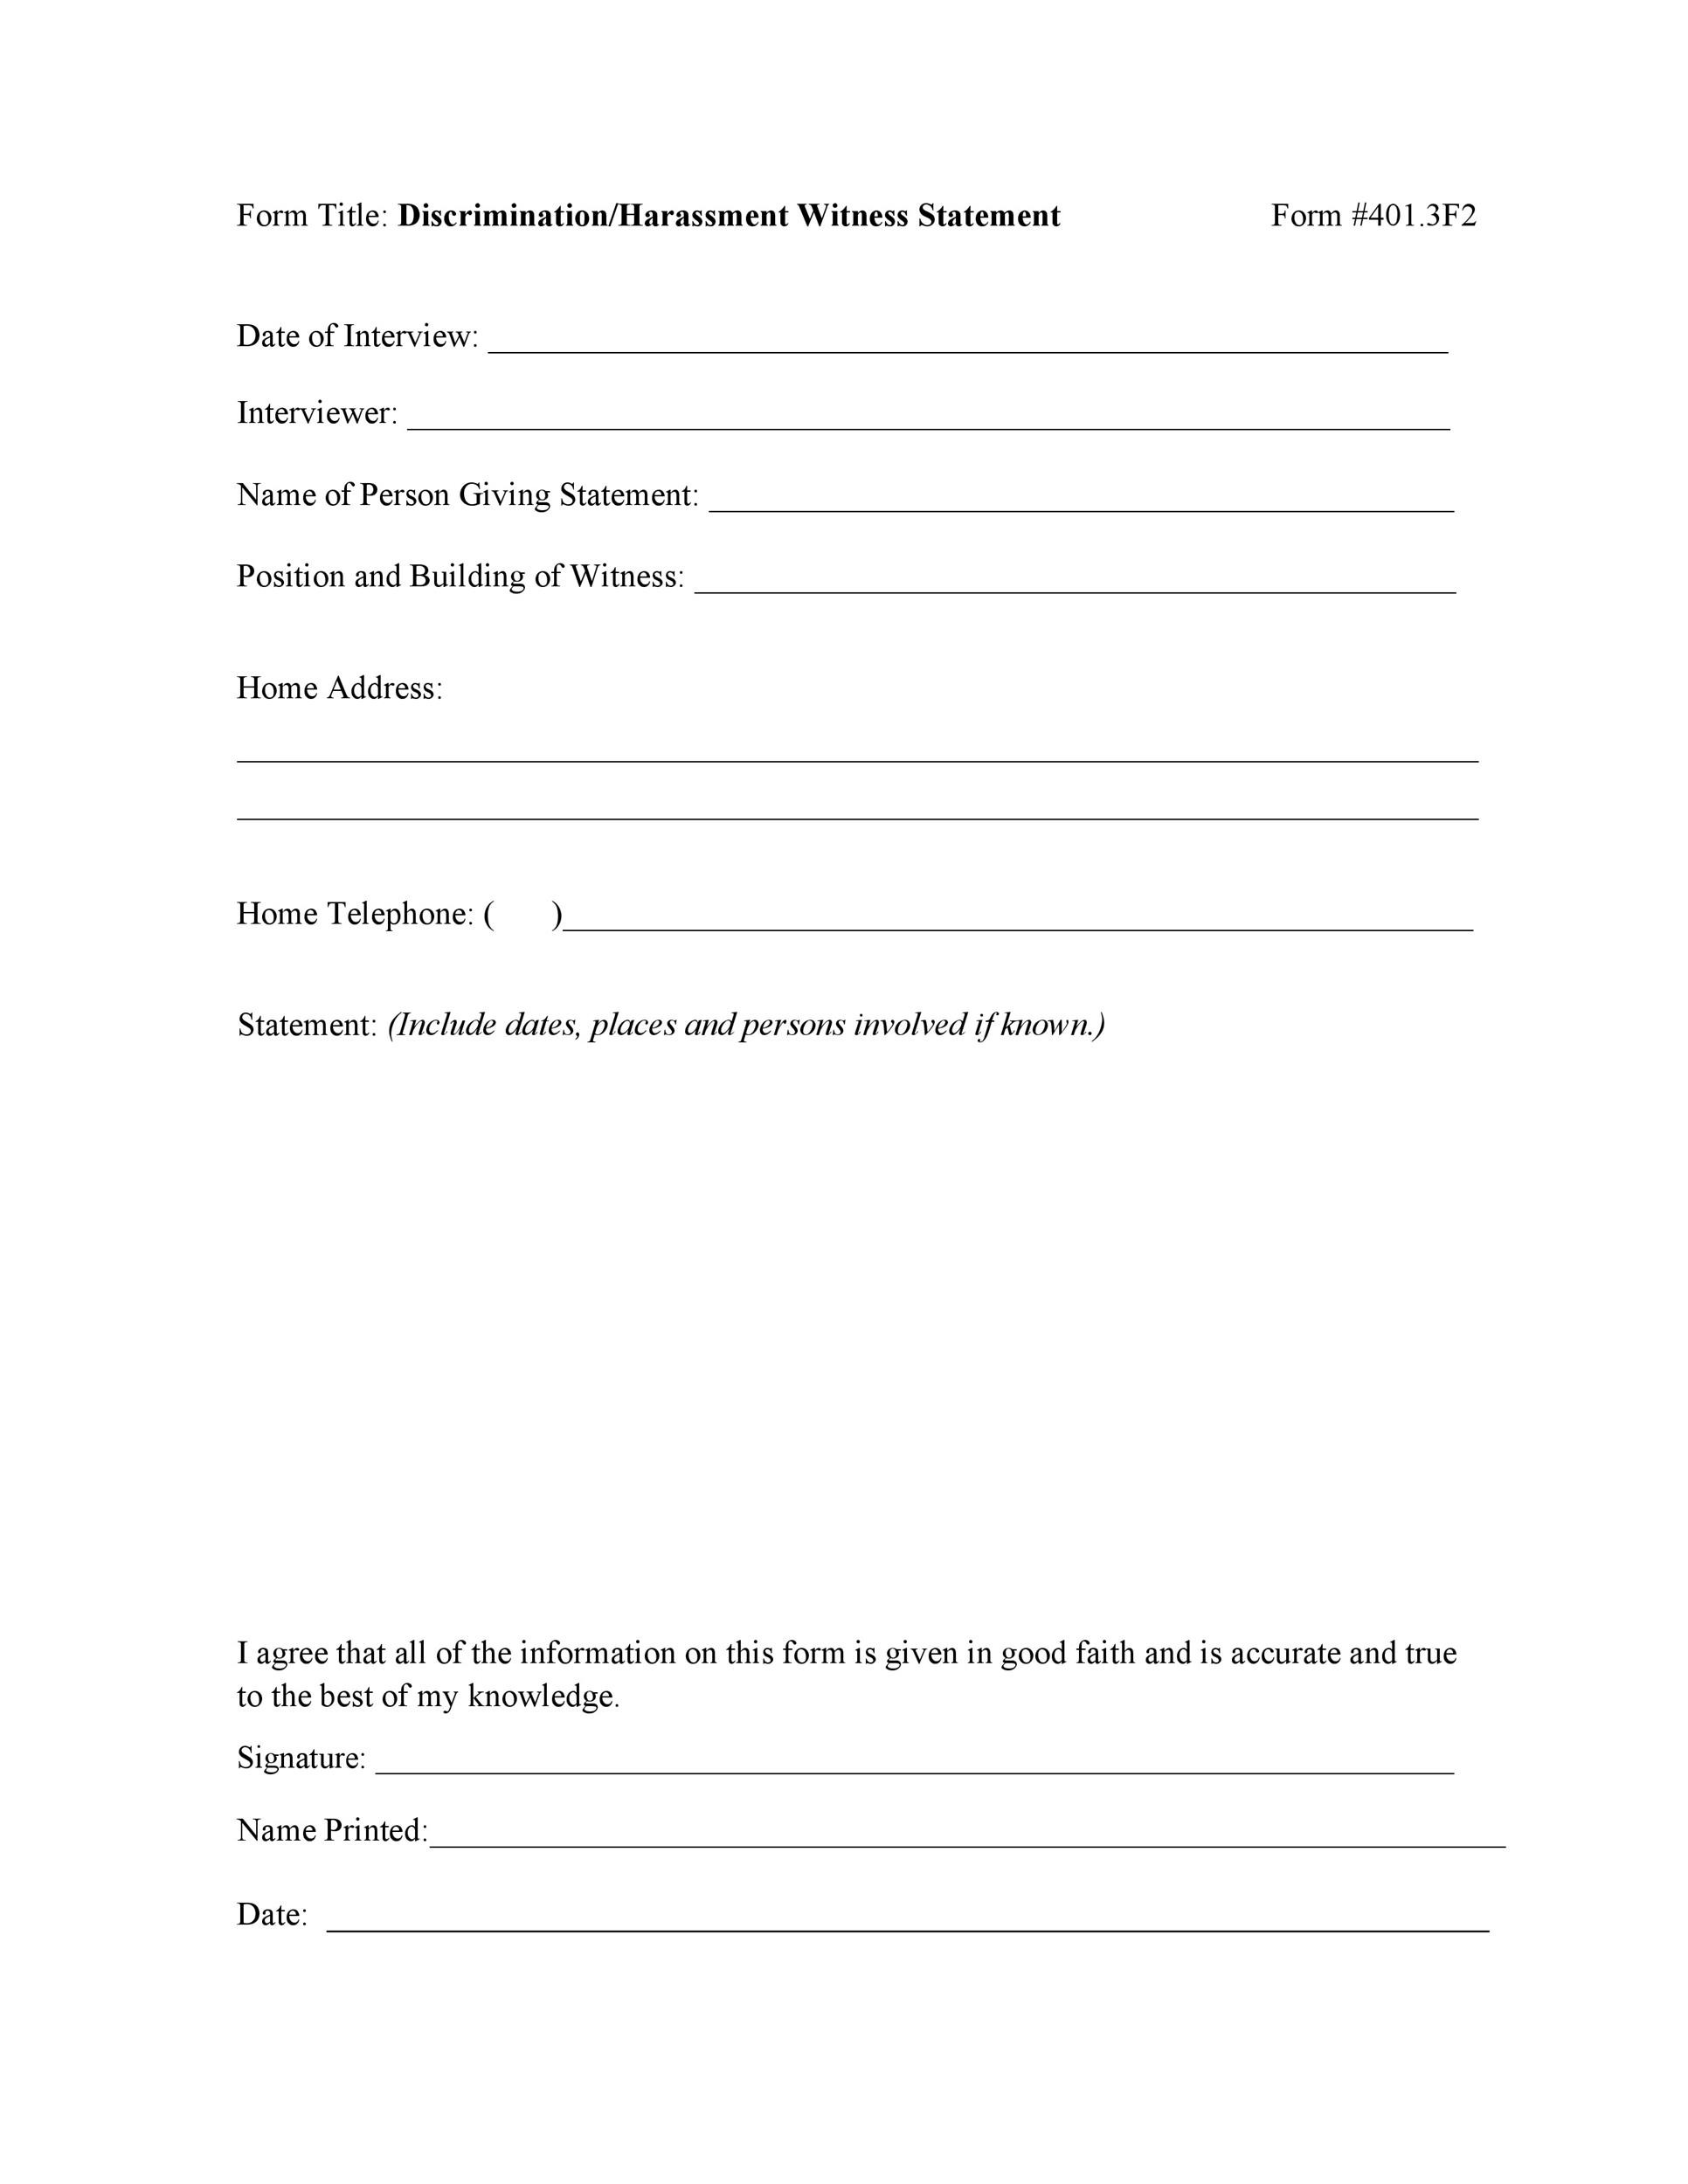 50 Professional Witness Statement Forms Templates ᐅ TemplateLab